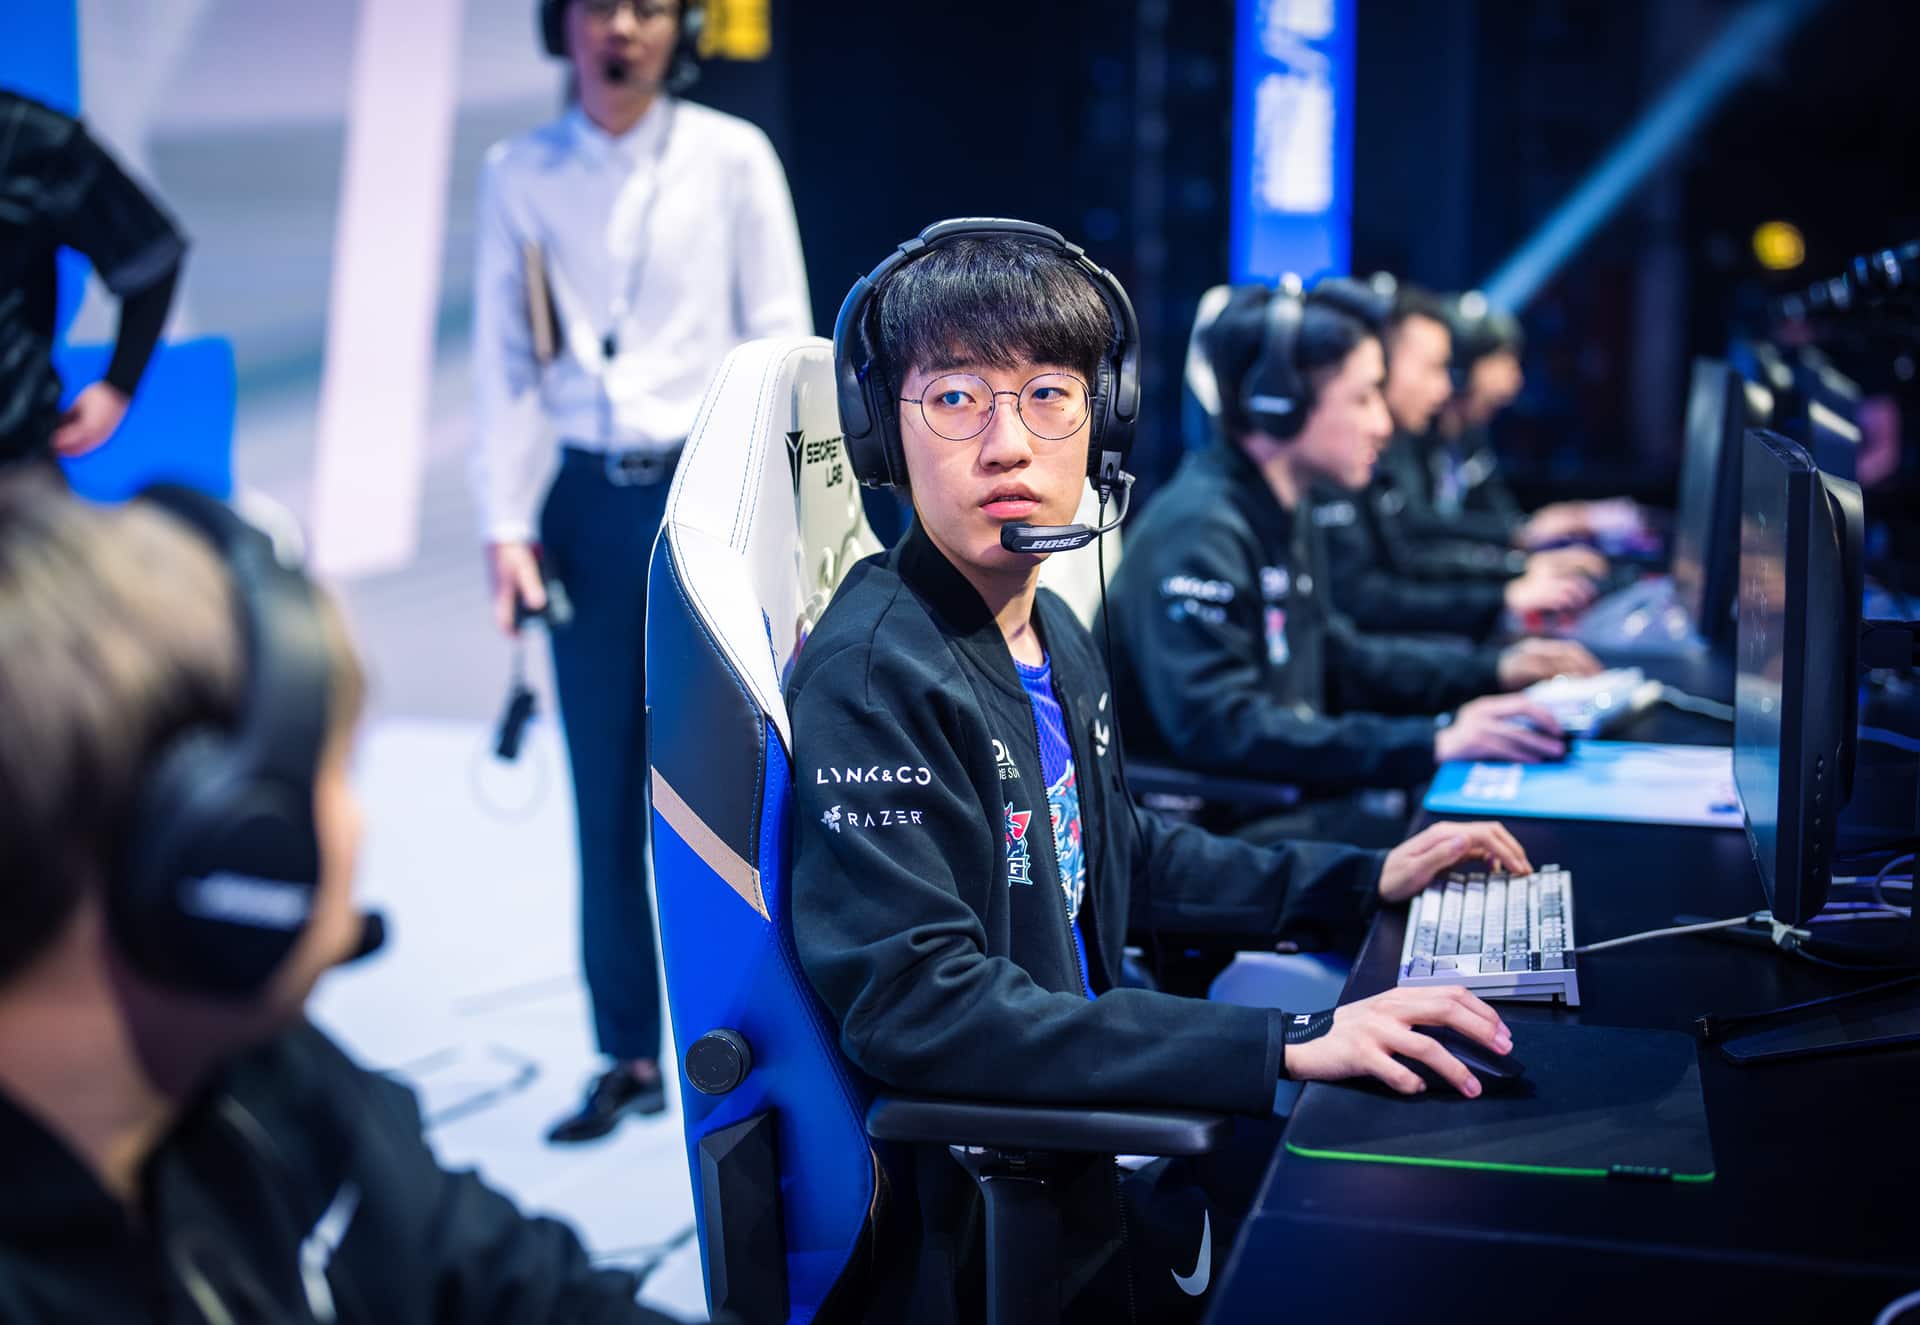 Tarzan playing League of Legends at Worlds 2021 for LNG Esports